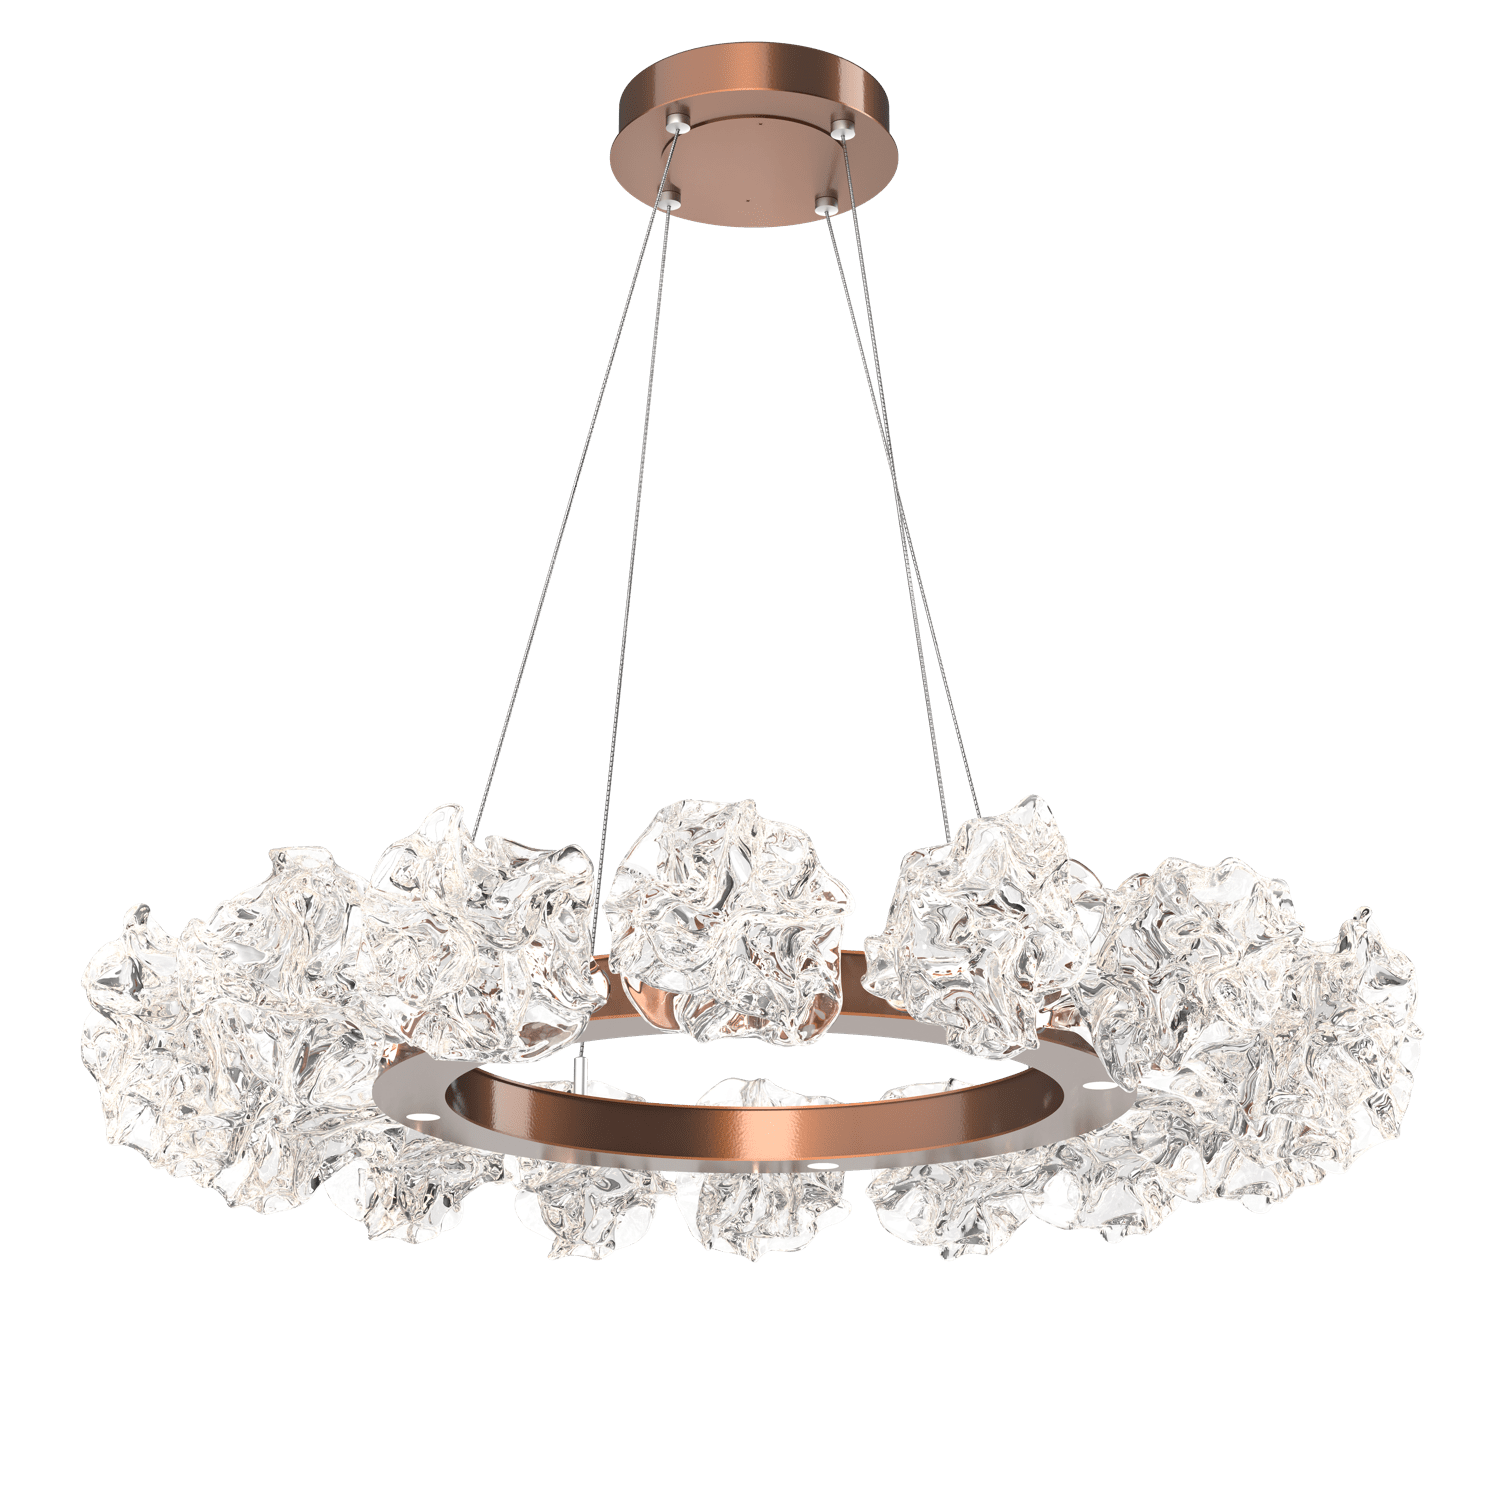 CHB0059-36-BB-Hammerton-Studio-Blossom-36-inch-radial-ring-chandelier-with-burnished-bronze-finish-and-clear-handblown-crystal-glass-shades-and-LED-lamping